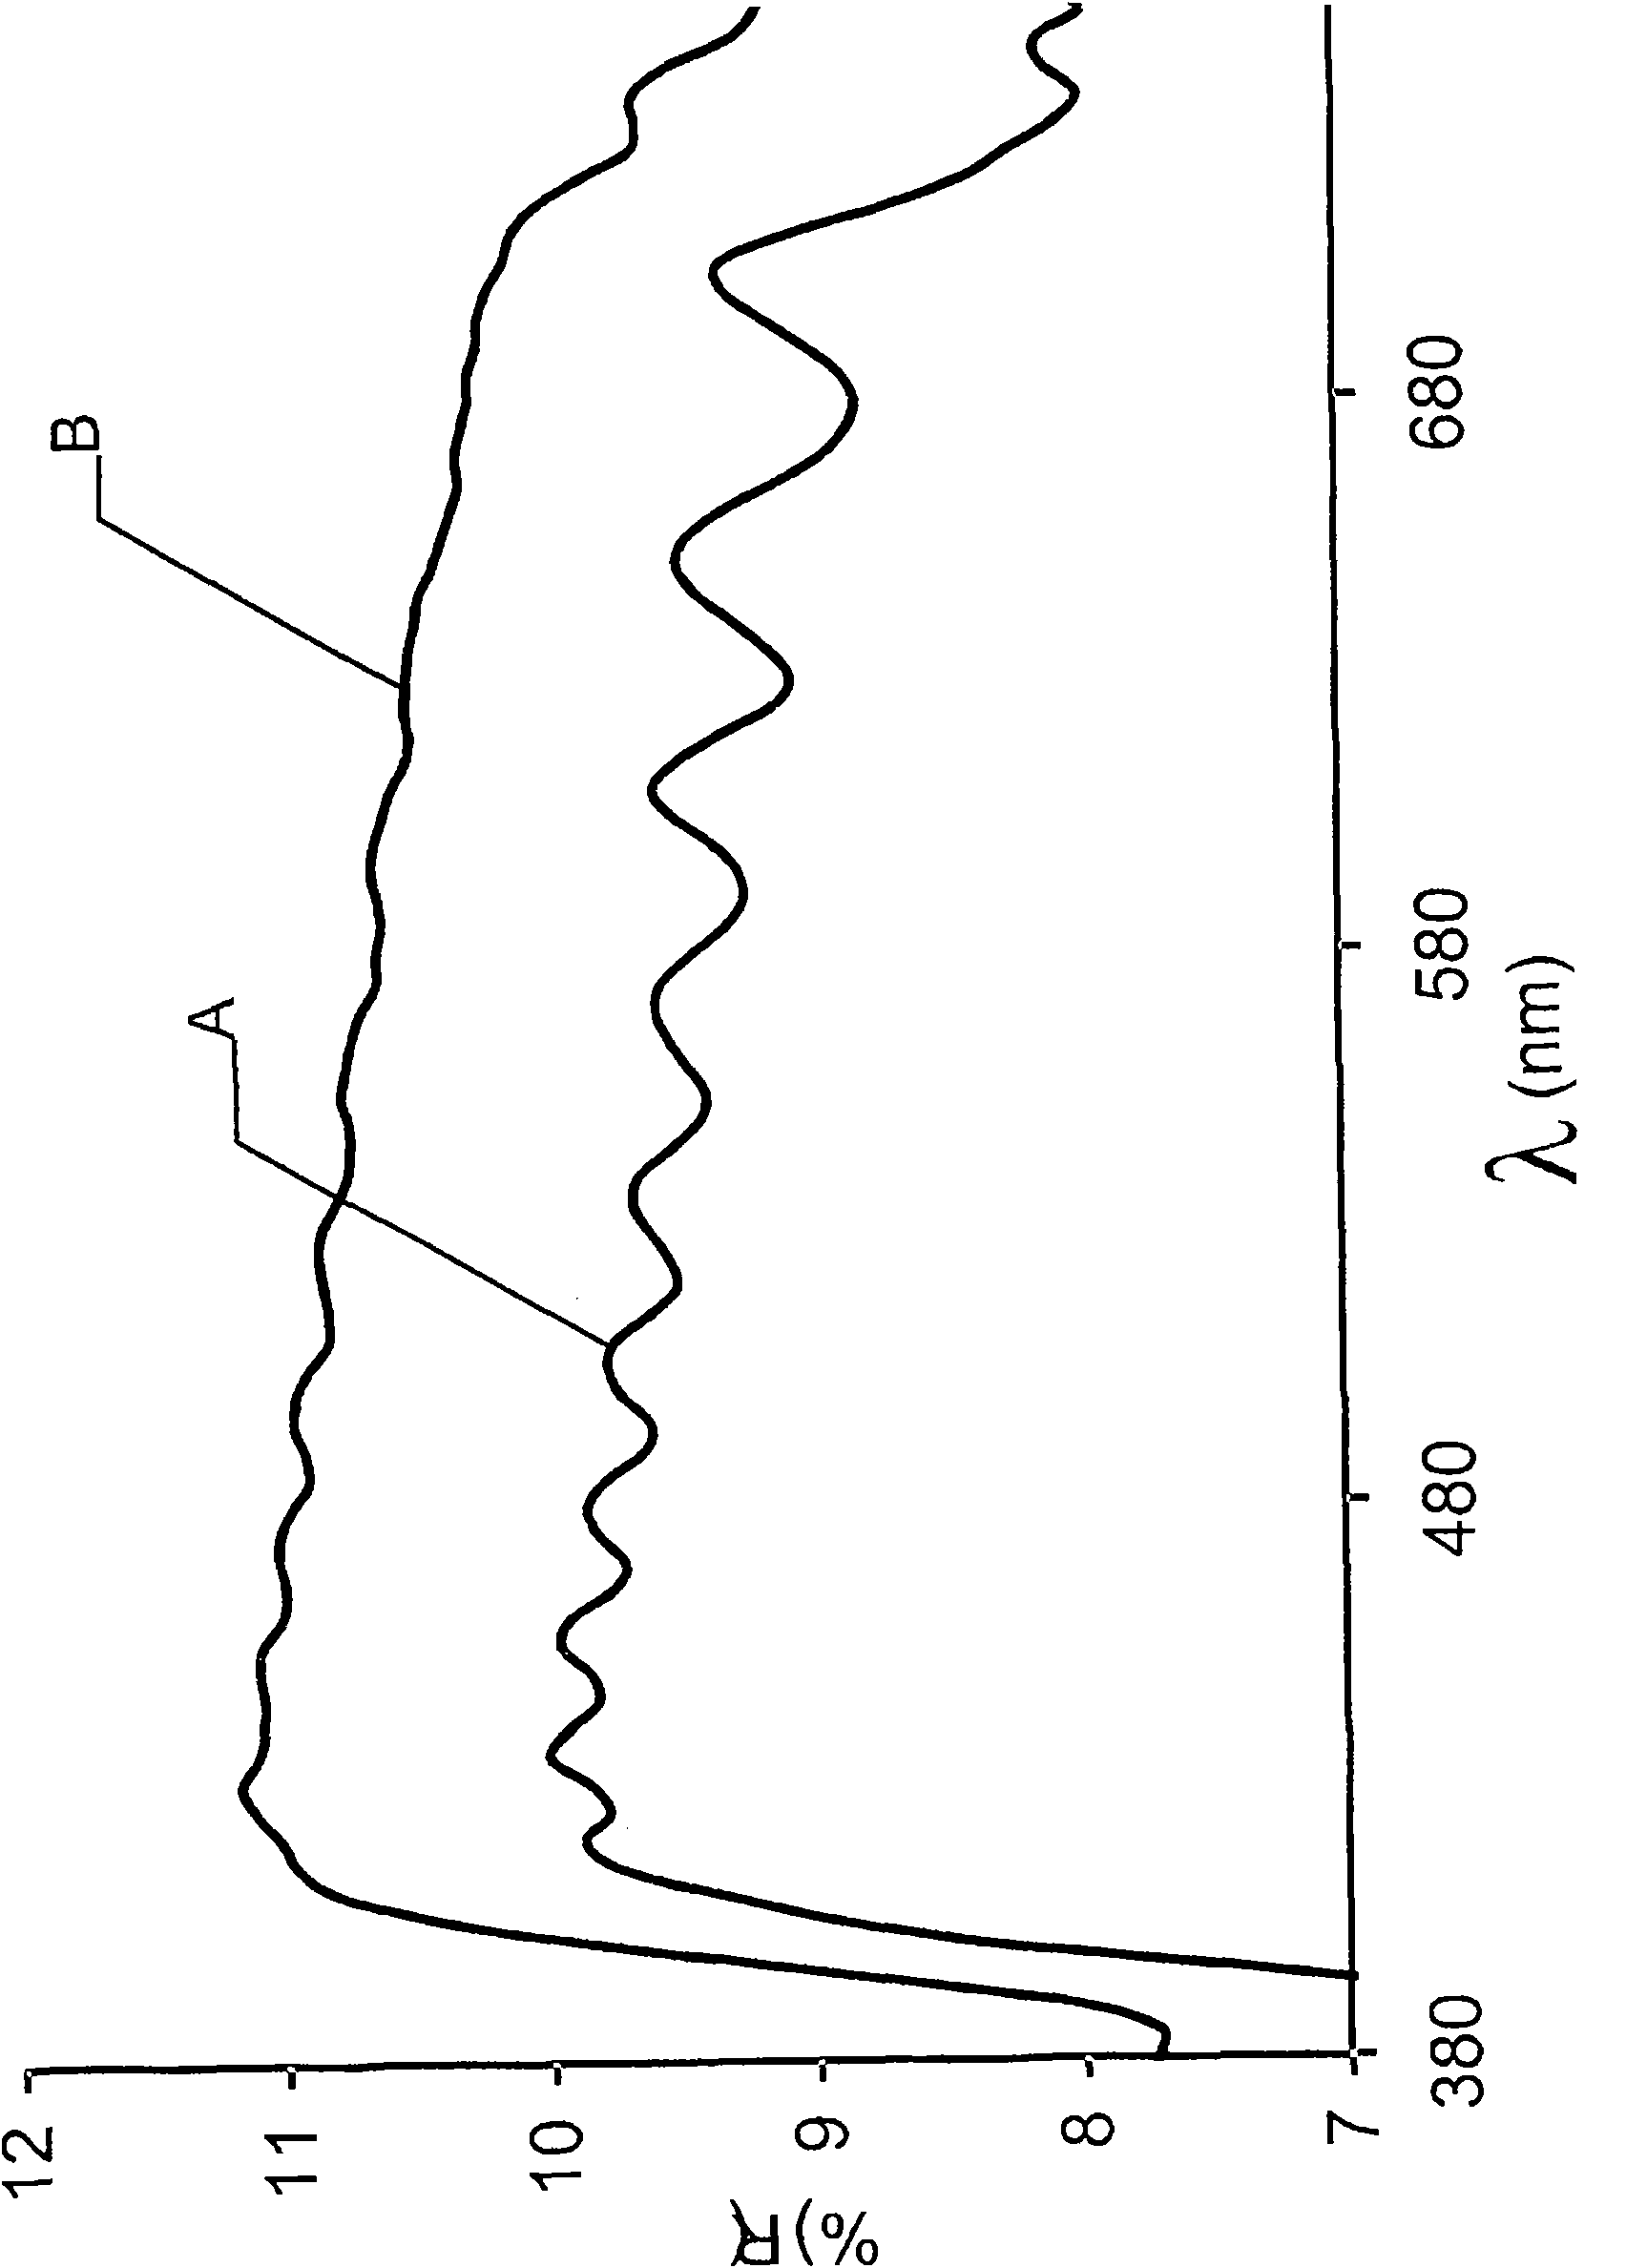 A layered structure comprising nanoparticles